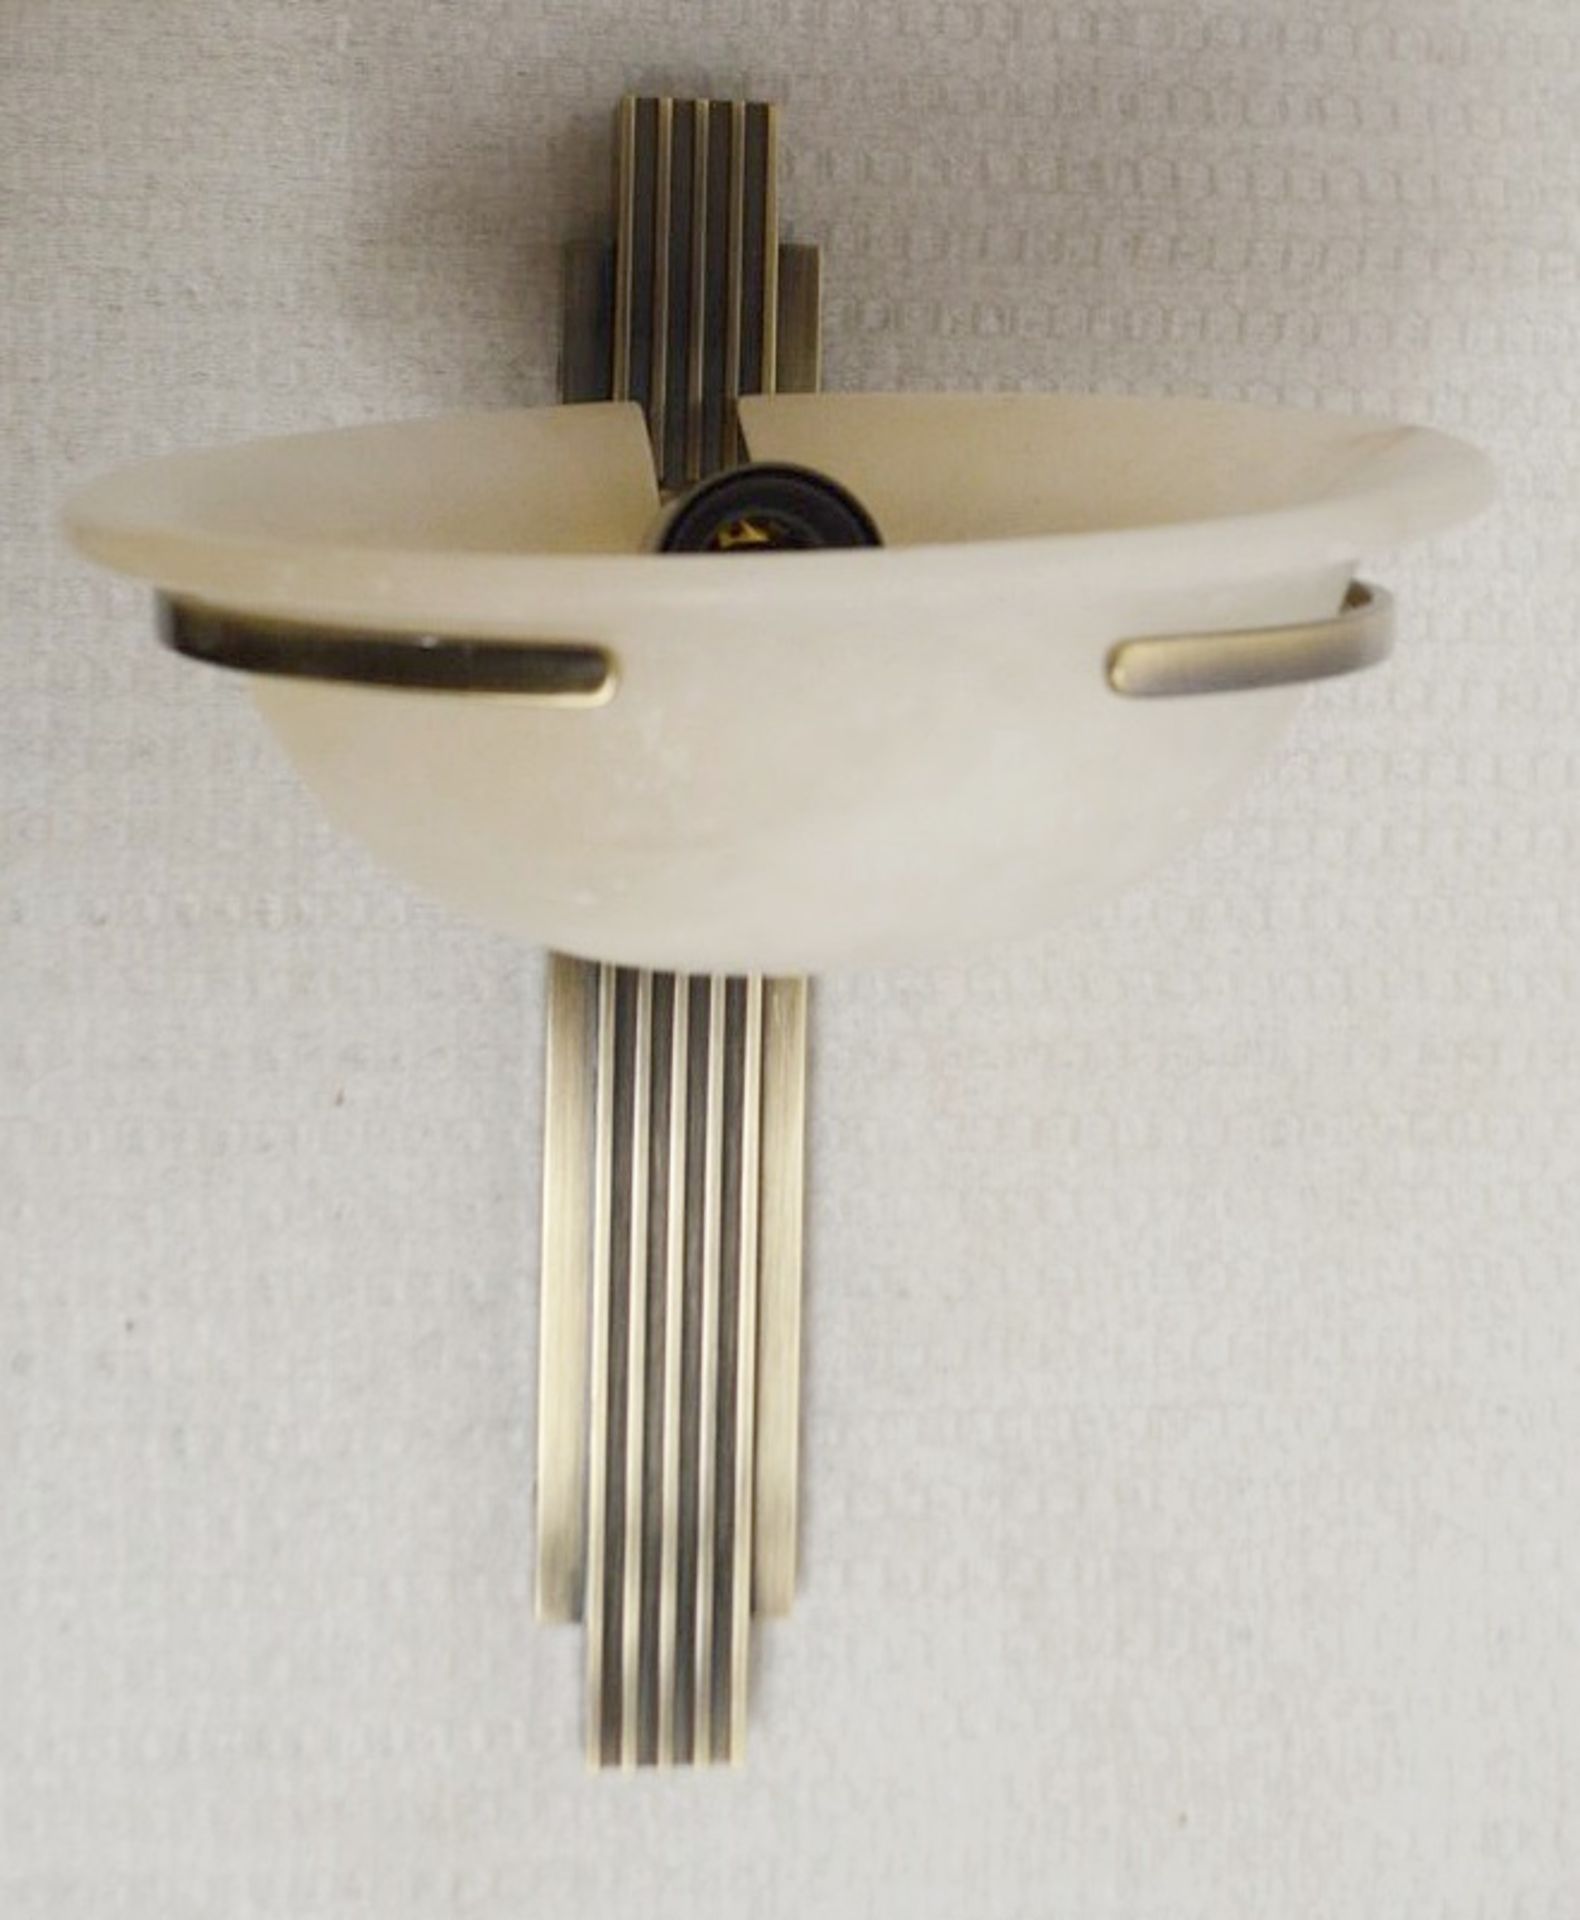 1 x CHELSOM Art Deco Wall Light Fitting Featuring An Alabaster Glass Shade And Antique Brass - Image 2 of 9